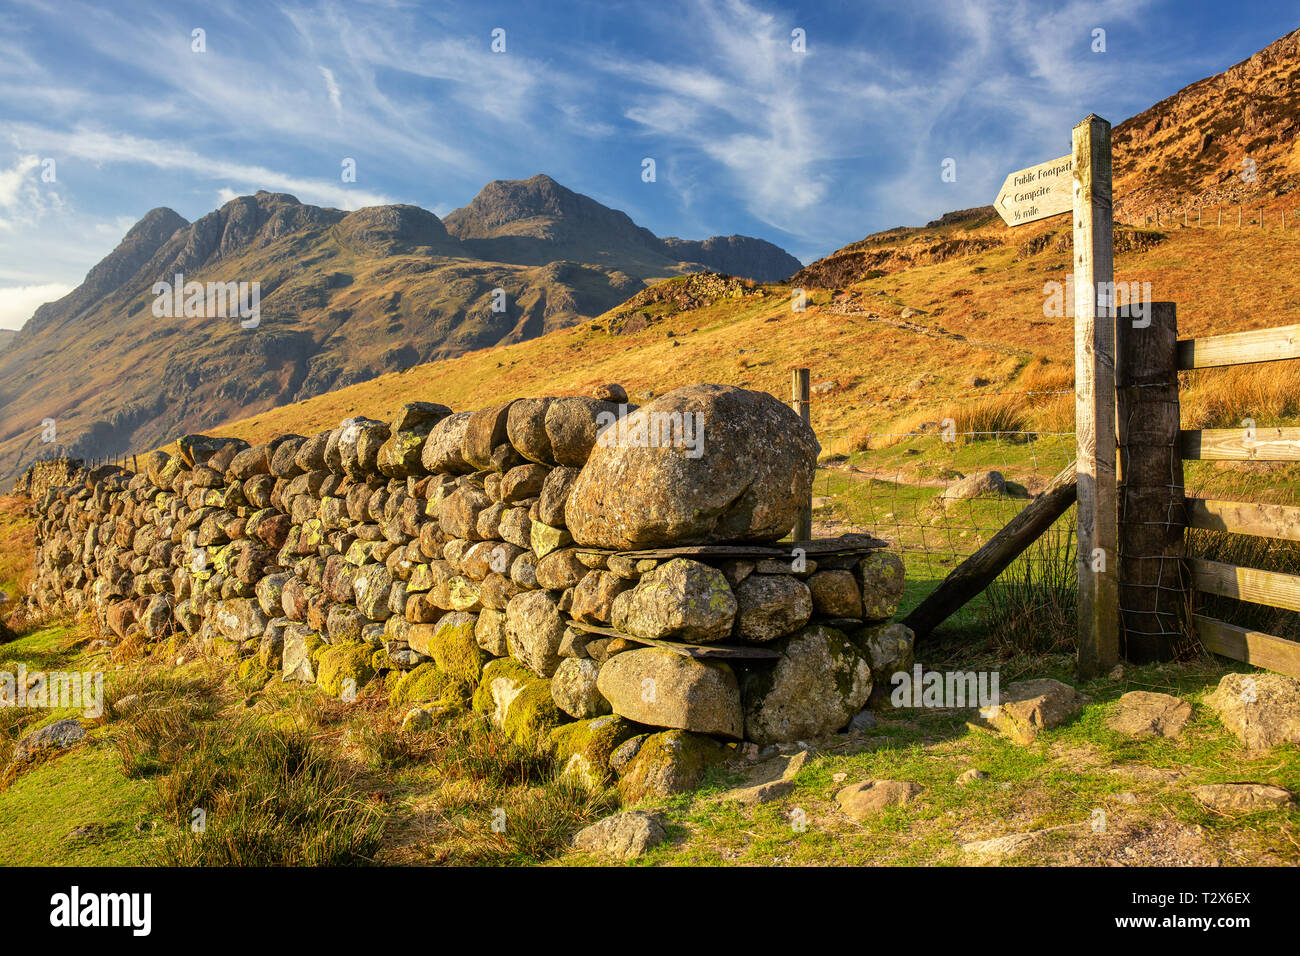 Langdale Pikes is one of many beautiful destinations in the English Lake District and particularly popular with fell walkers and climbers. Stock Photo